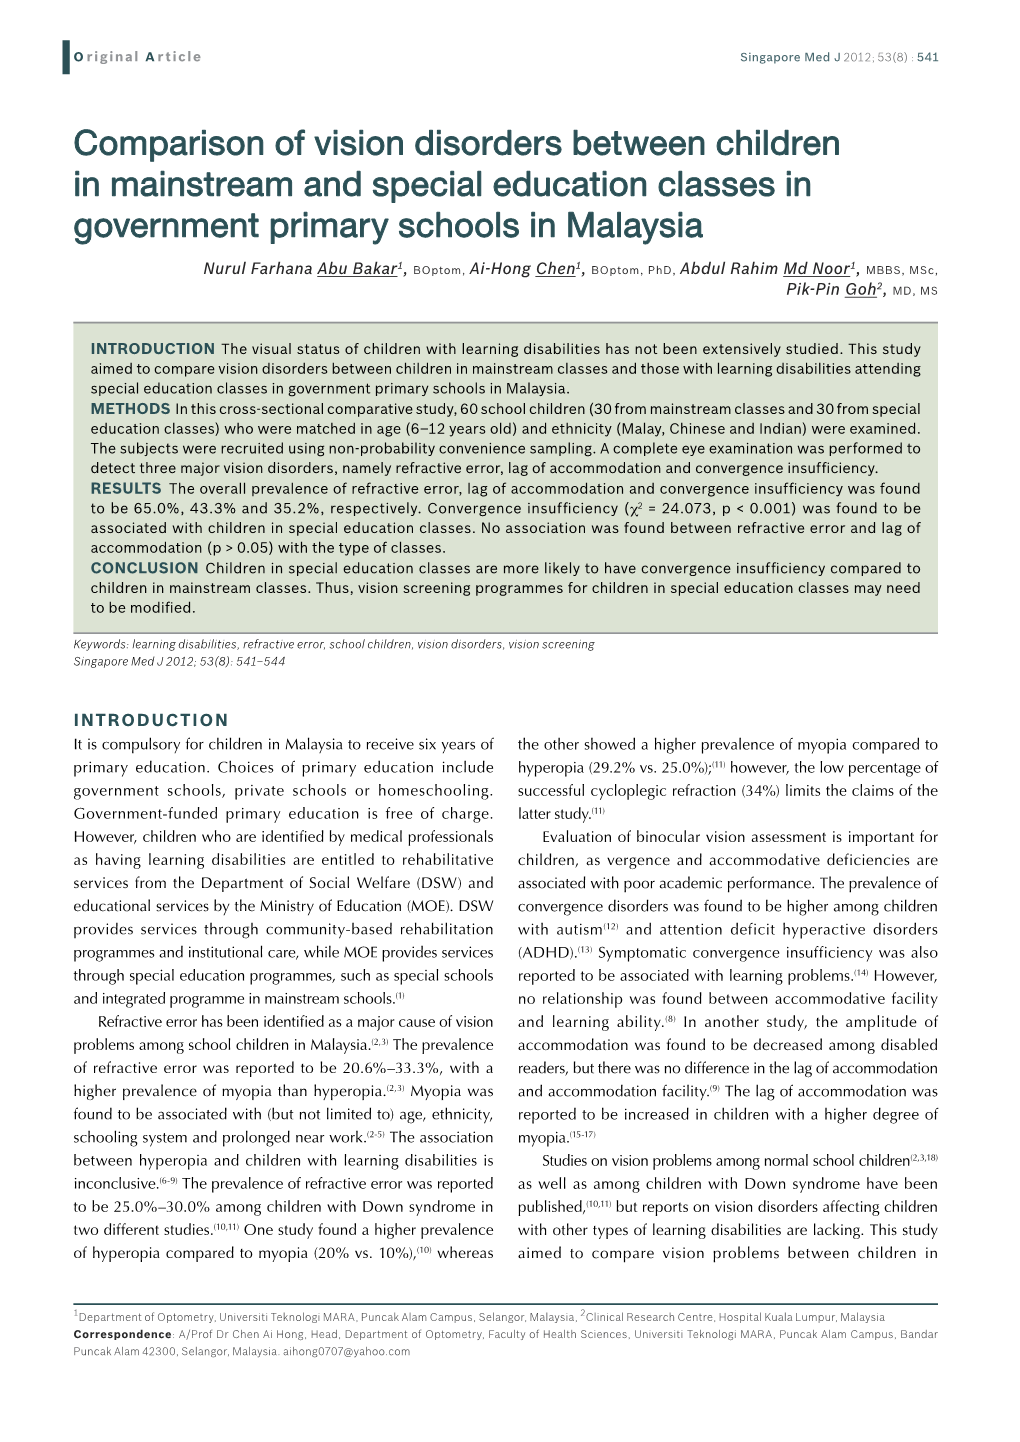 Comparison of Vision Disorders Between Children in Mainstream and Special Education Classes in Government Primary Schools in Malaysia